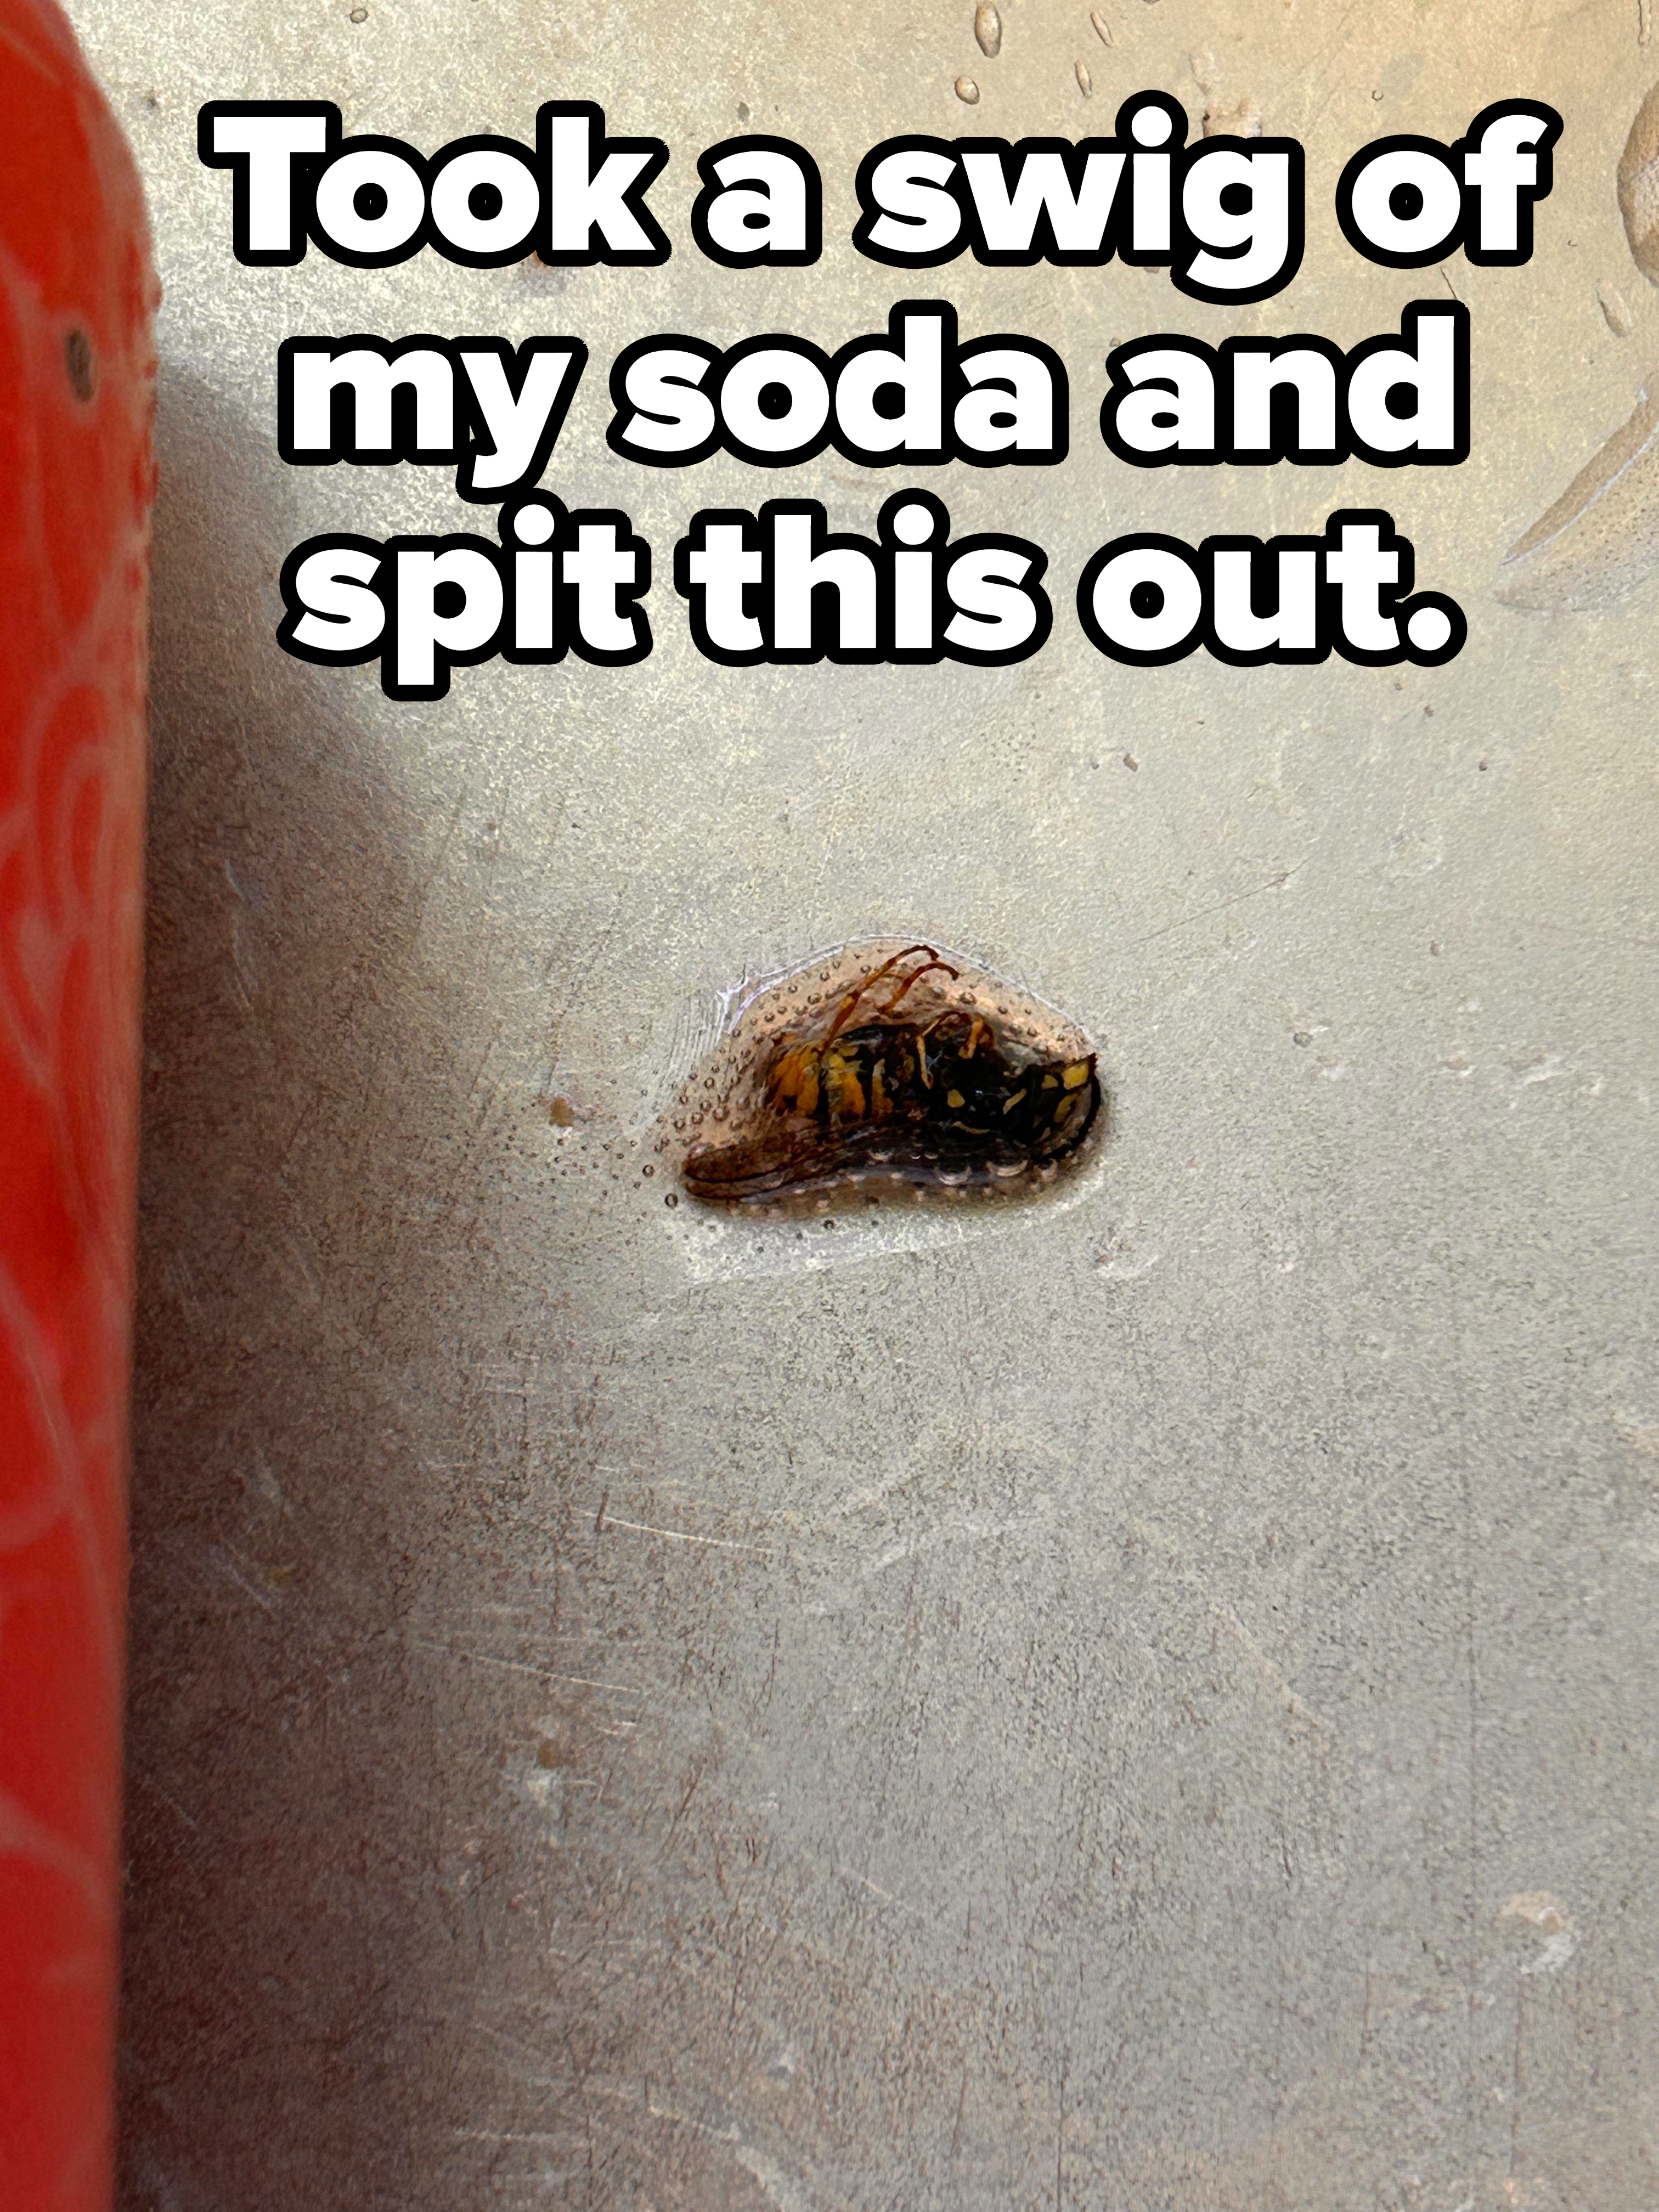 Close-up of a soaked wasp with caption &quot;Took a swig of my soda and spit this out&quot;